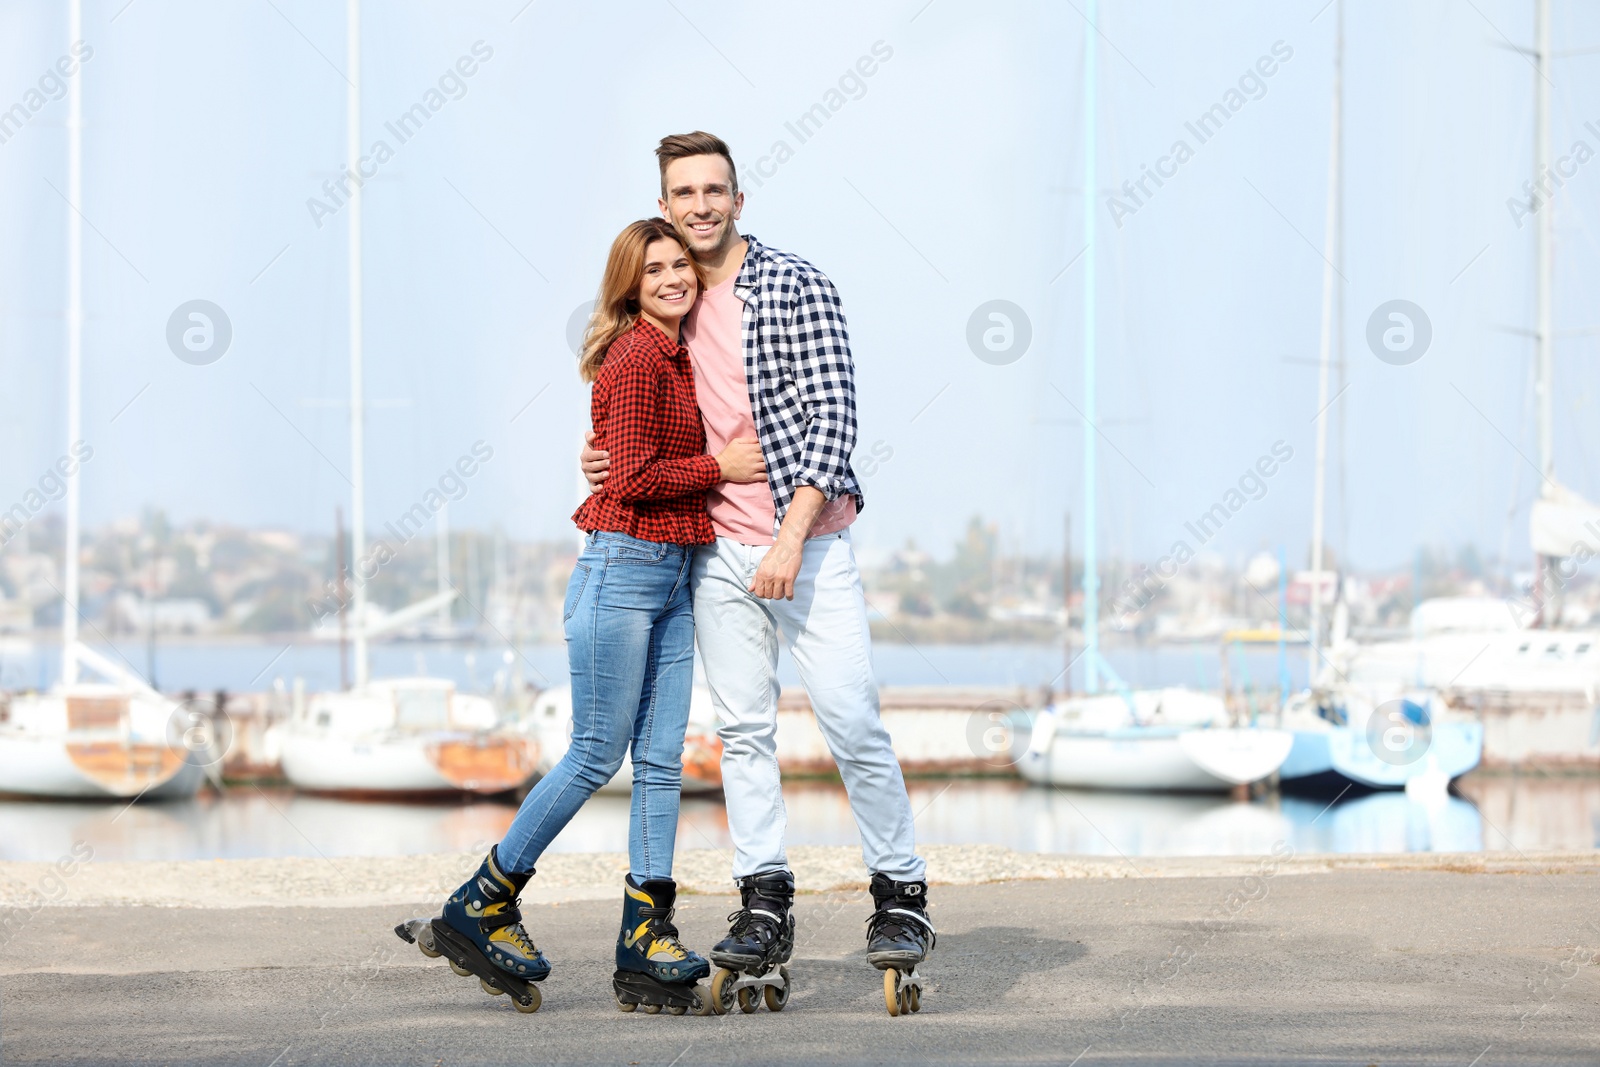 Photo of Happy lovely couple roller skating on embankment. Space for text